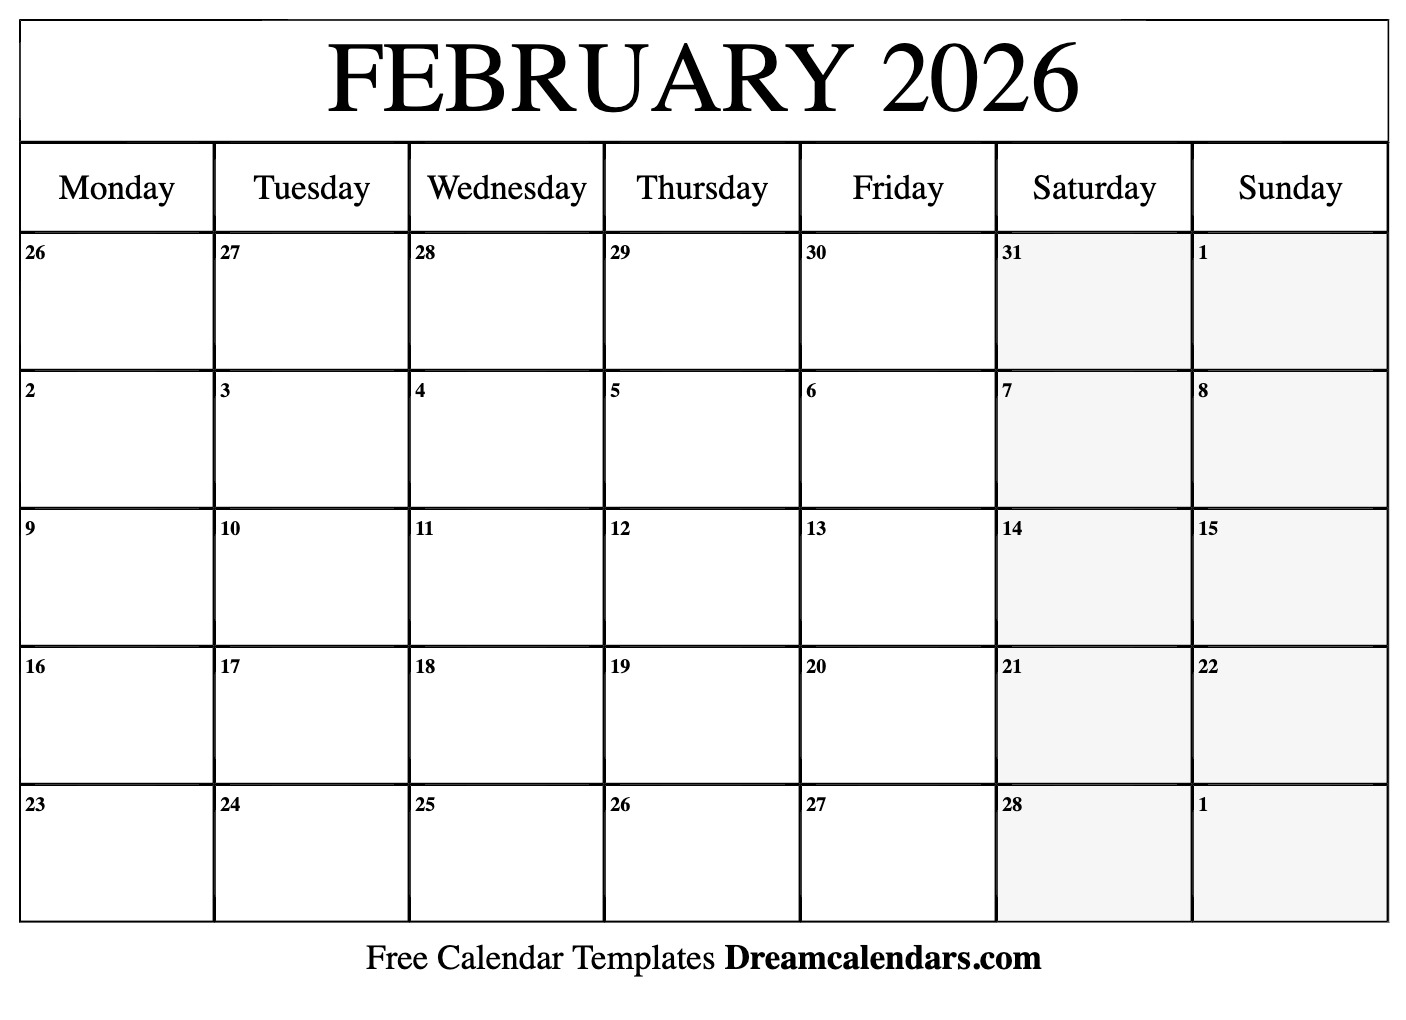 February 2026 Calendar - Free Printable with Holidays and Observances